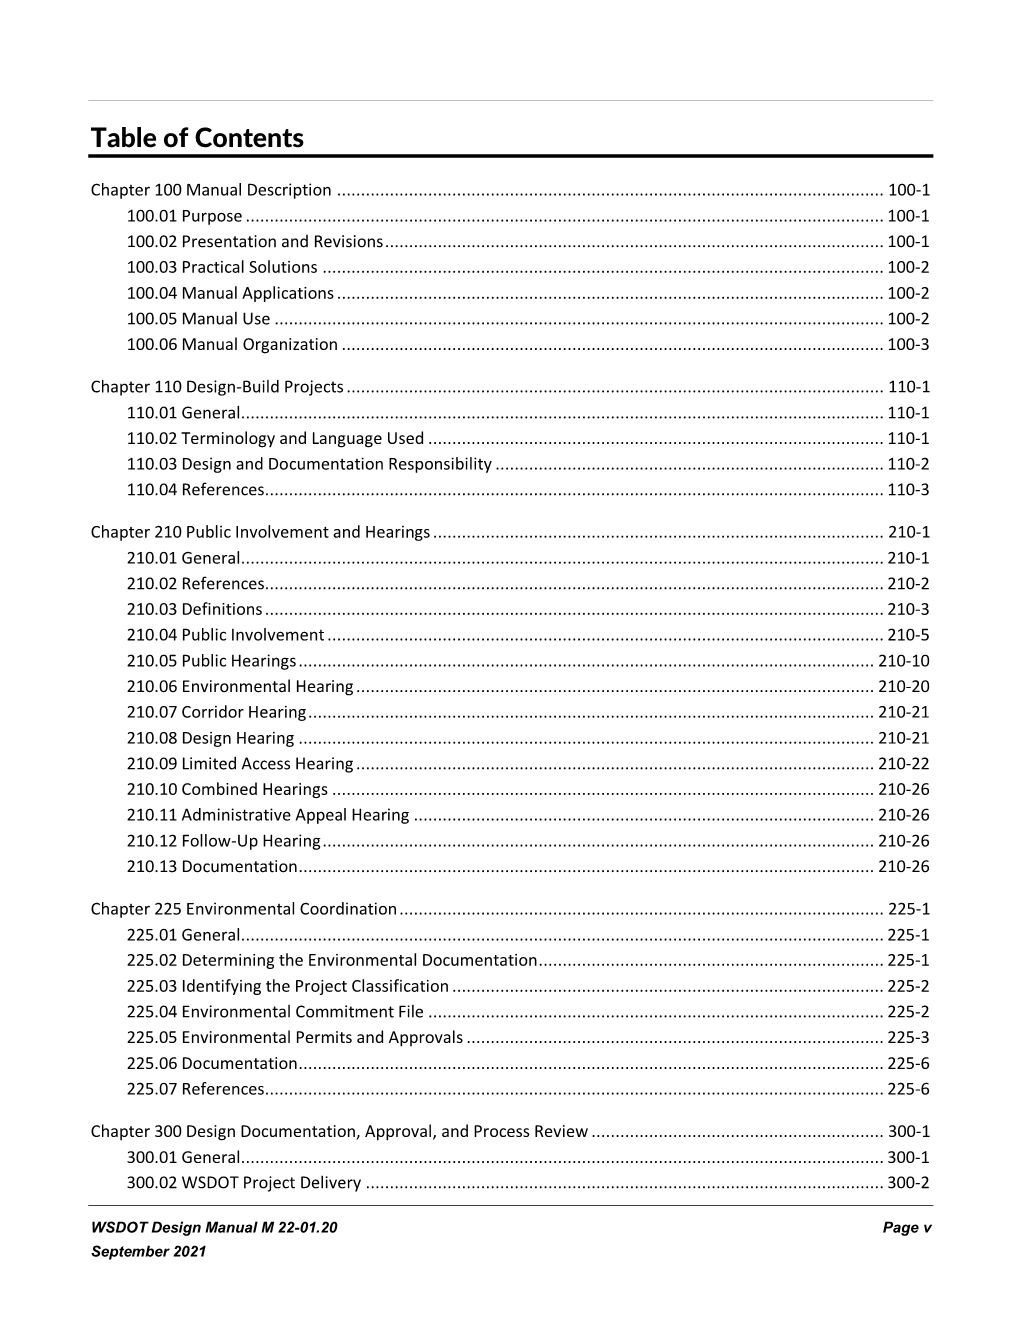 Design Manual Table of Contents